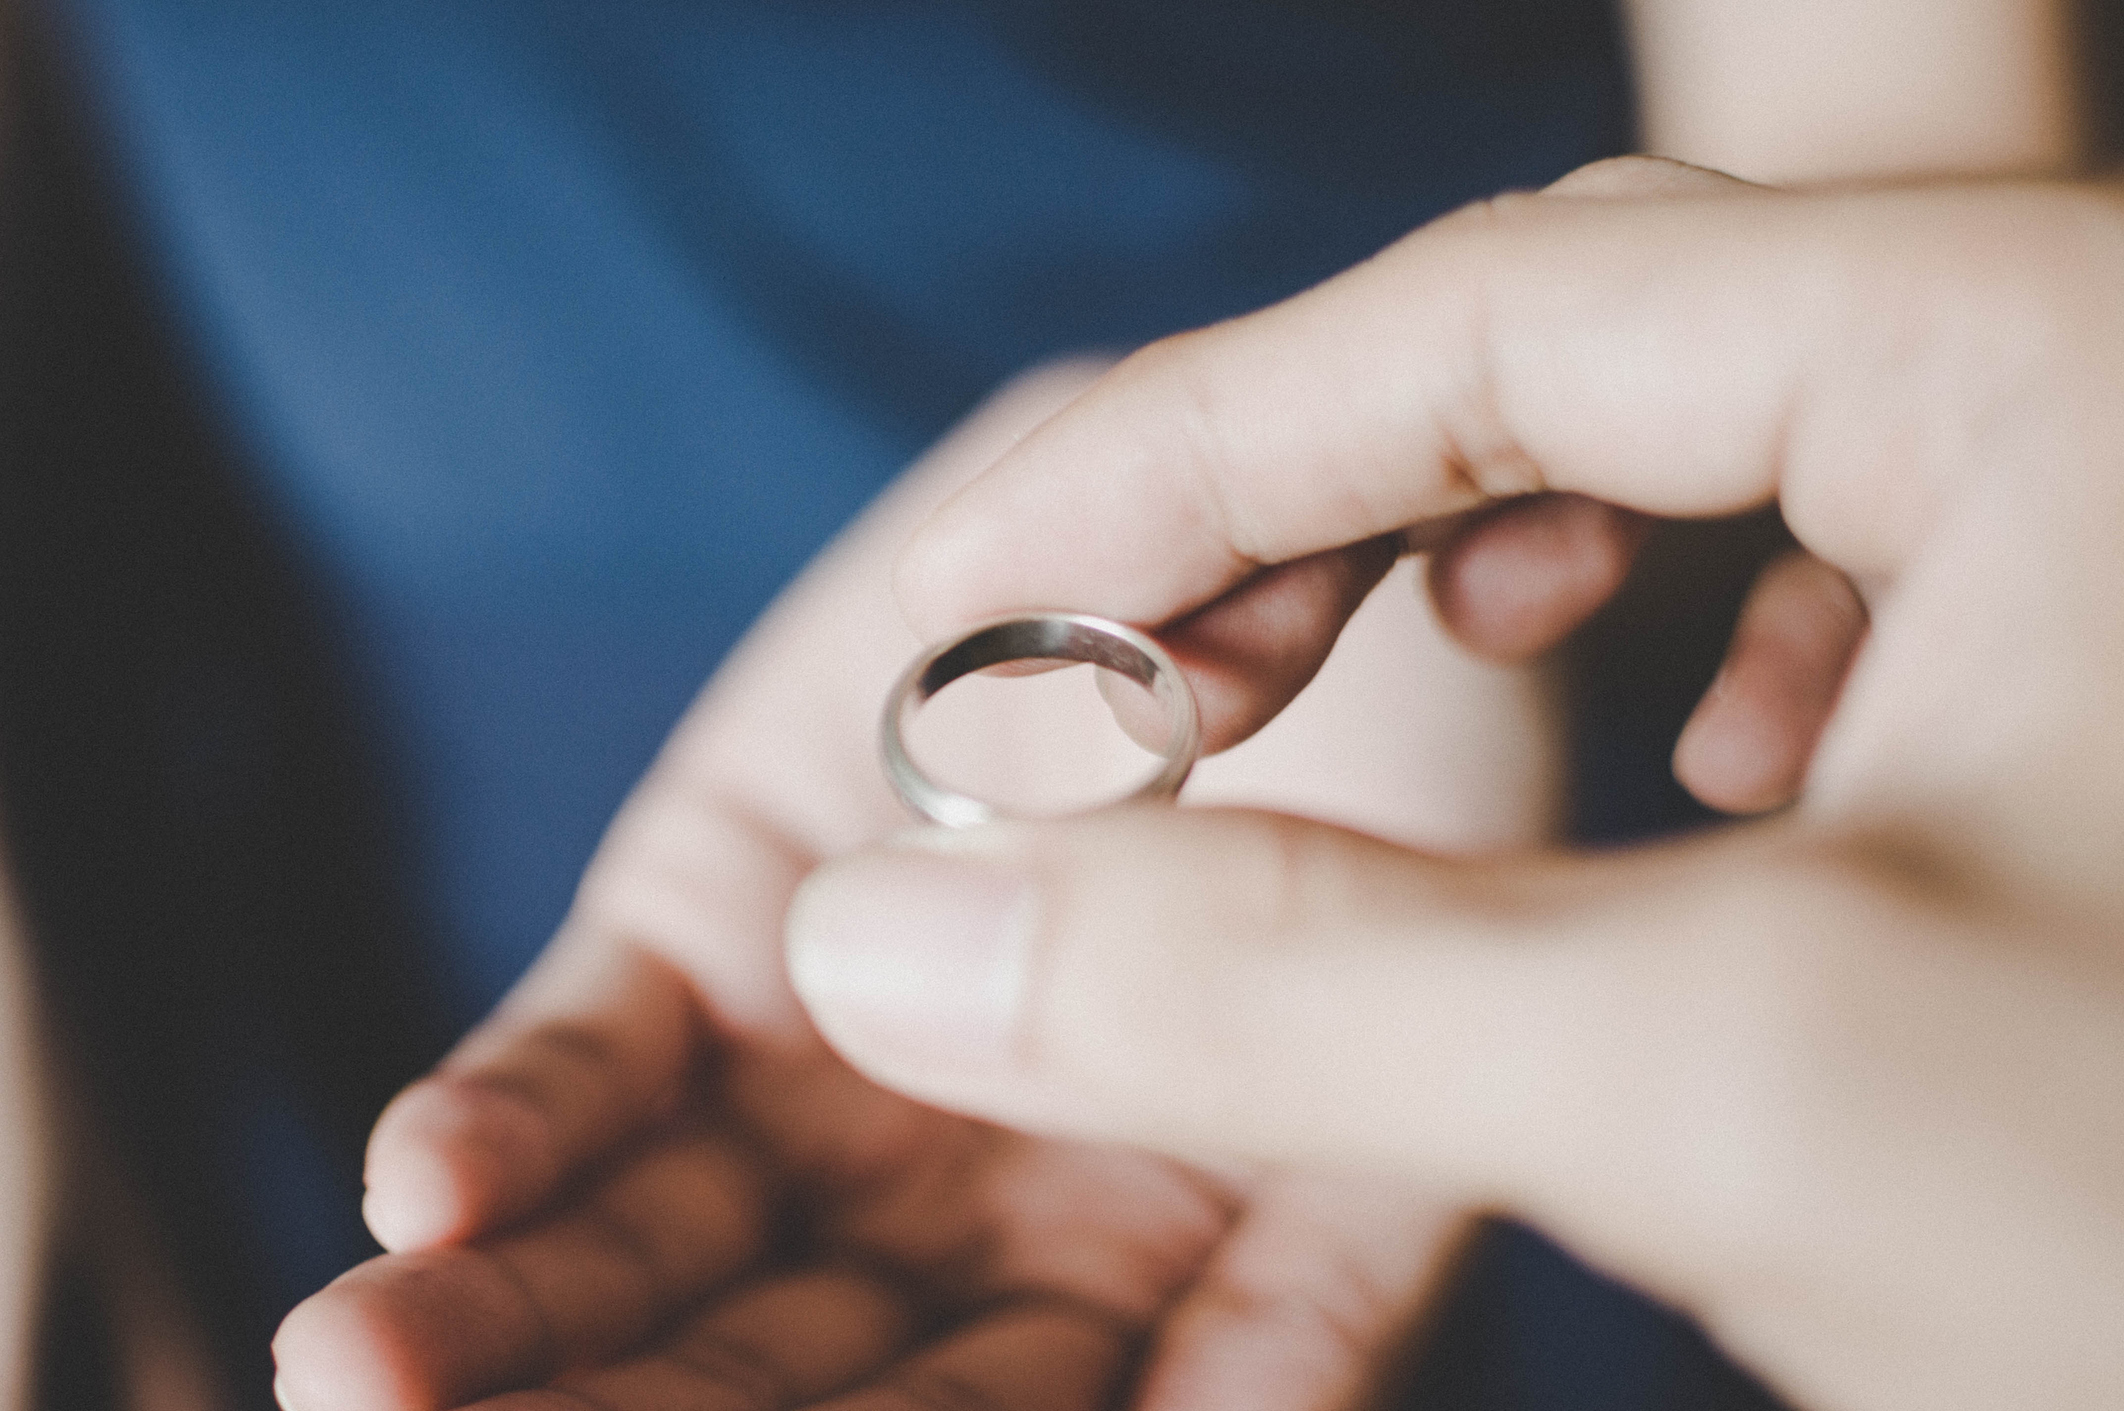 Close-up of a hand holding a silver ring, about to hand it to someone else